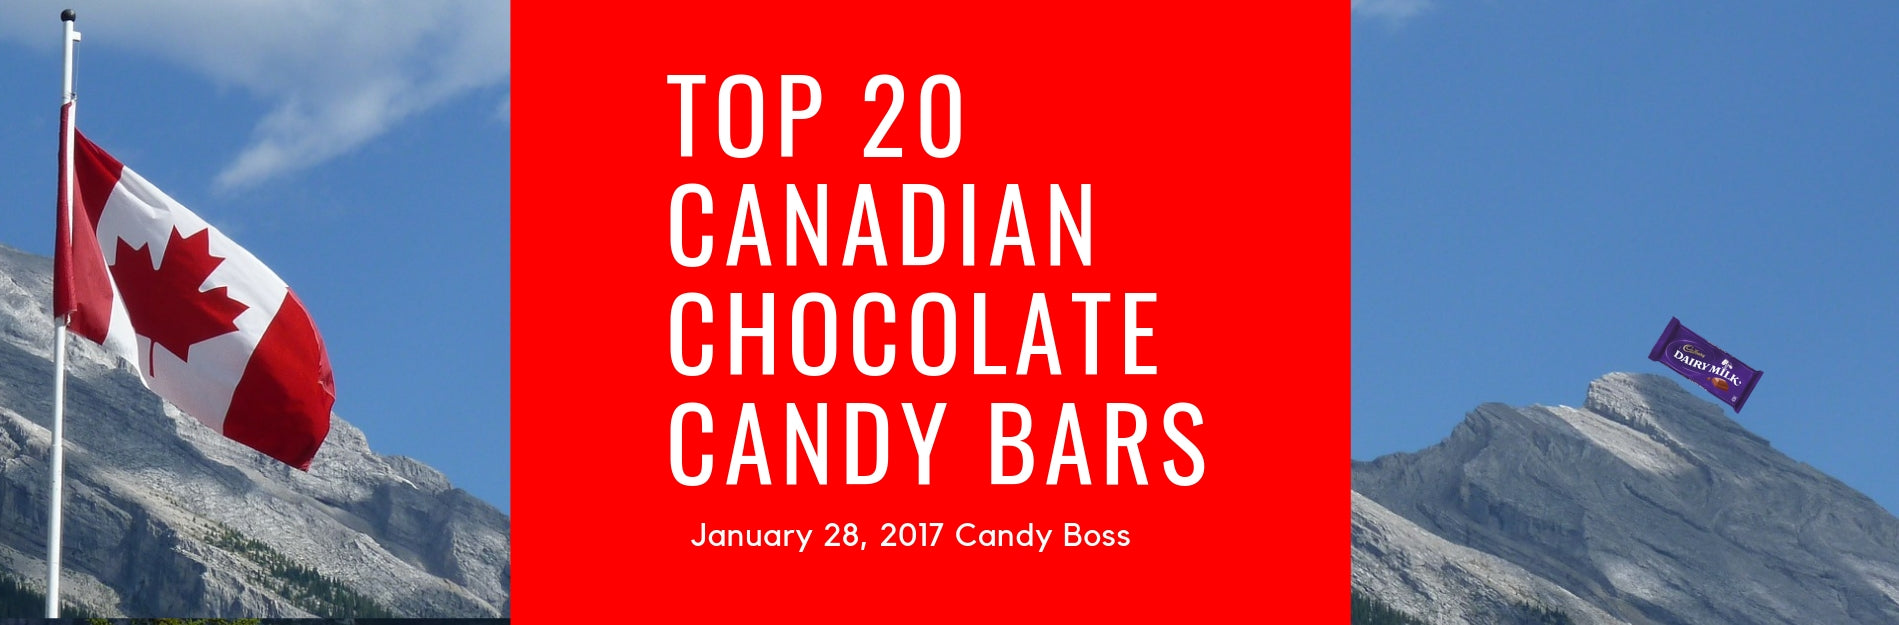 42 Best Pictures Top Candy Bars : Top 50 most popular: candy